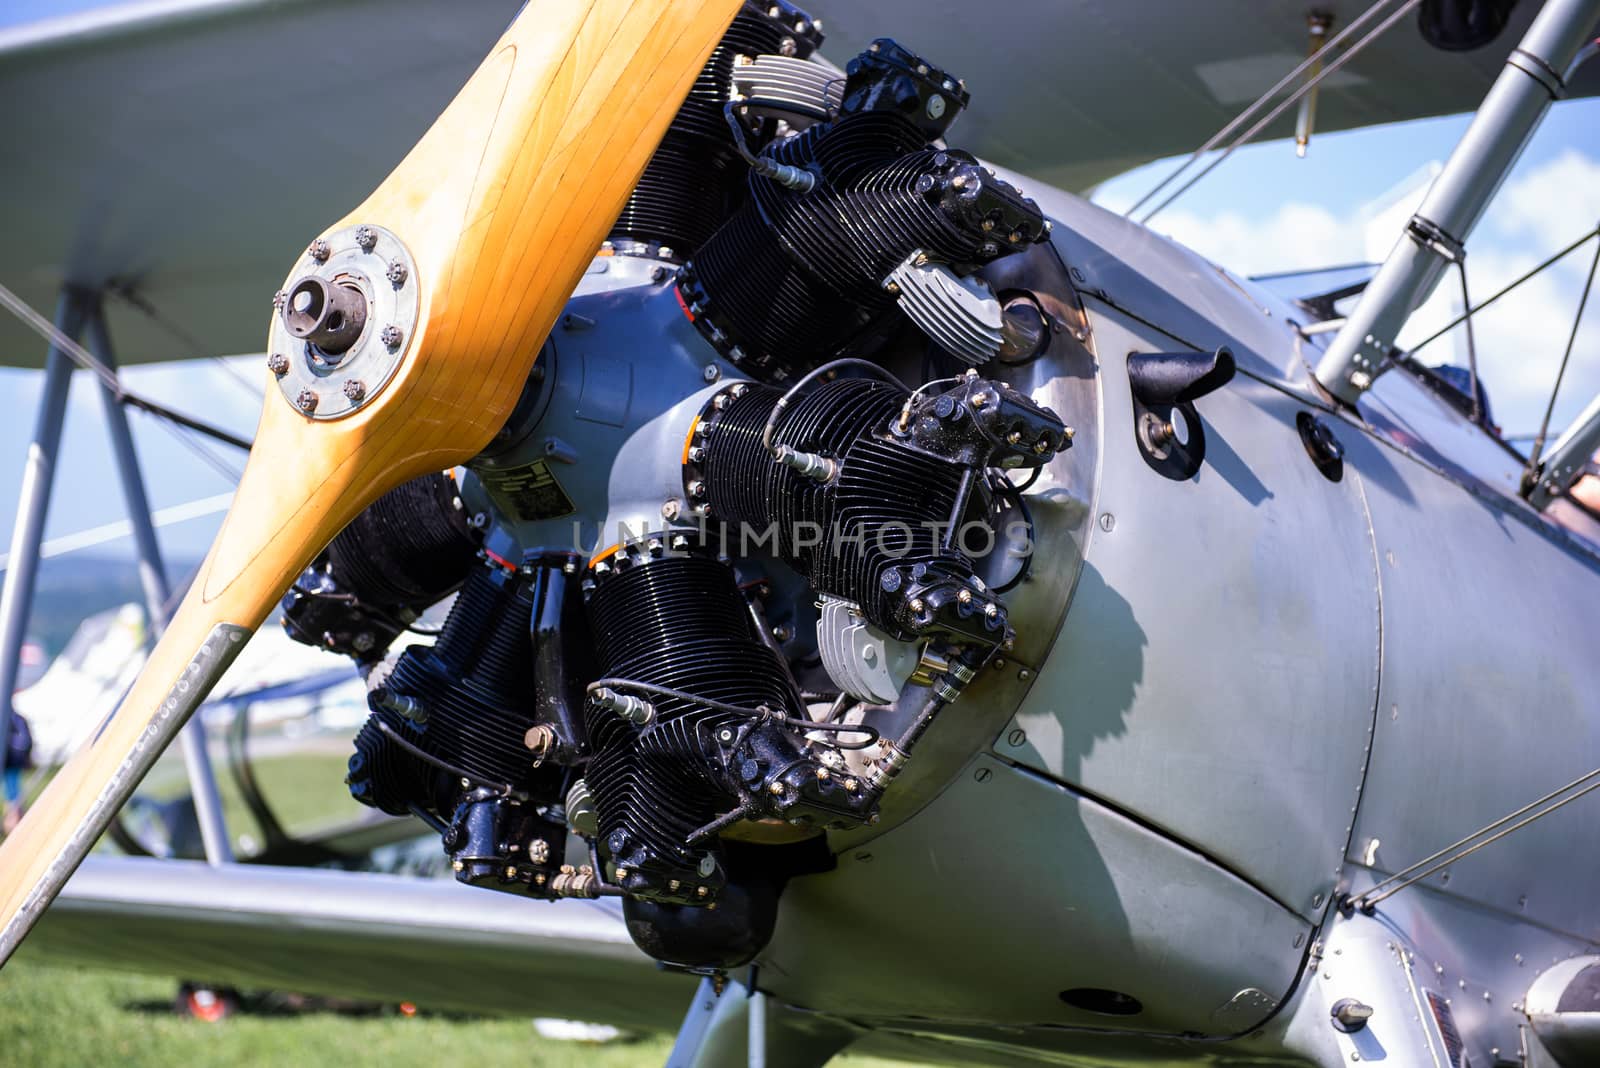 Vintage aircraft with radial engine and wooden propeller, close up of nose section by asafaric